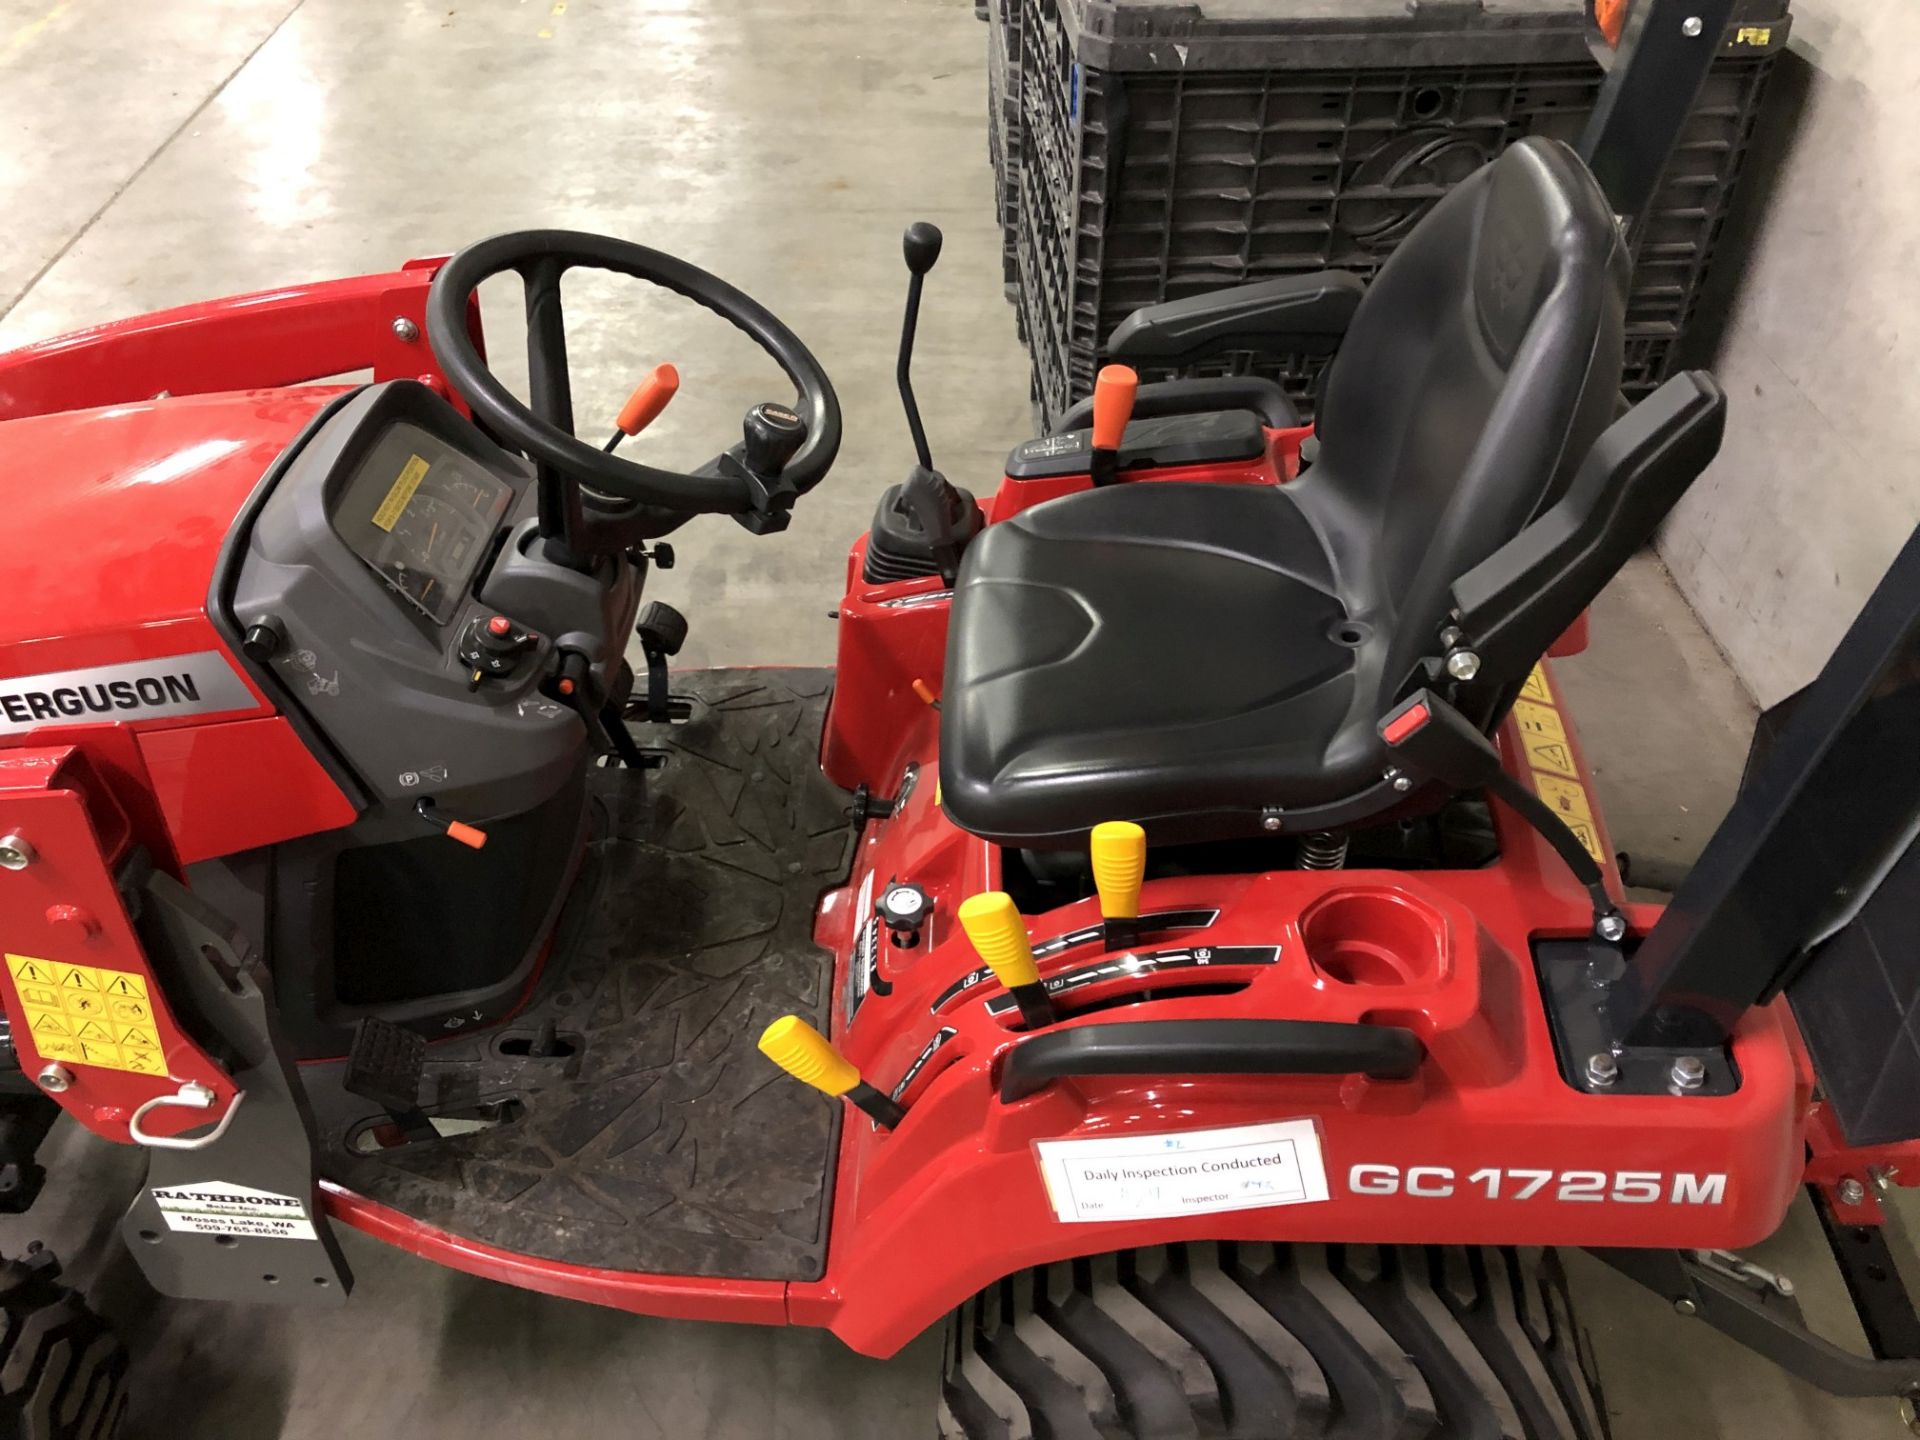 2019 Massey Ferguson GC1725M Tractor w/ Front Loader - Image 5 of 11